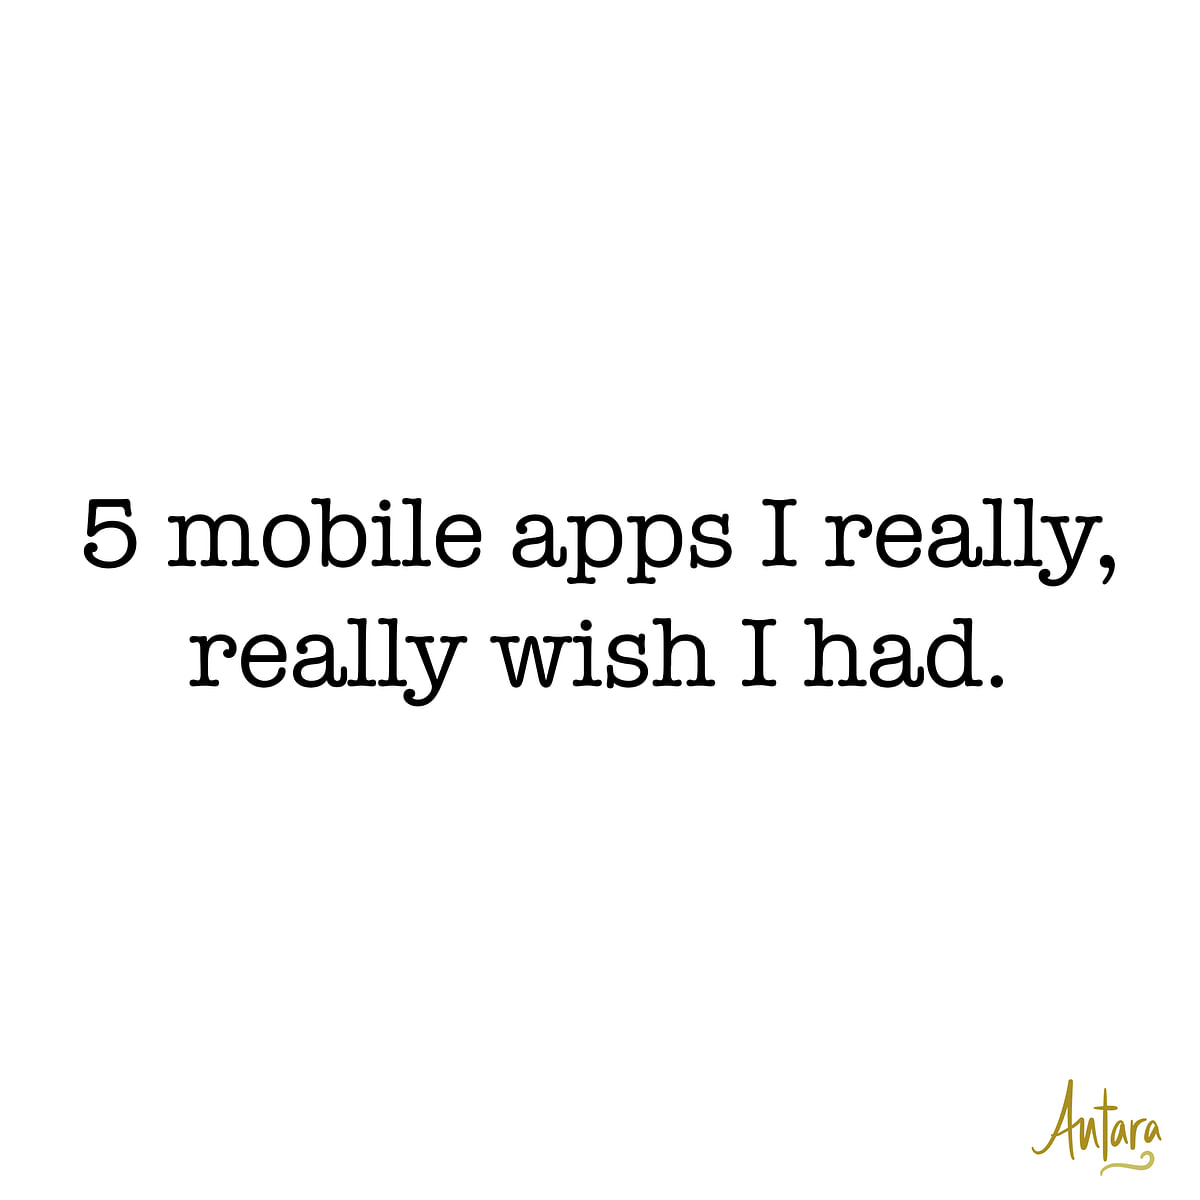 What would our lives be like if we really had apps that we needed. 